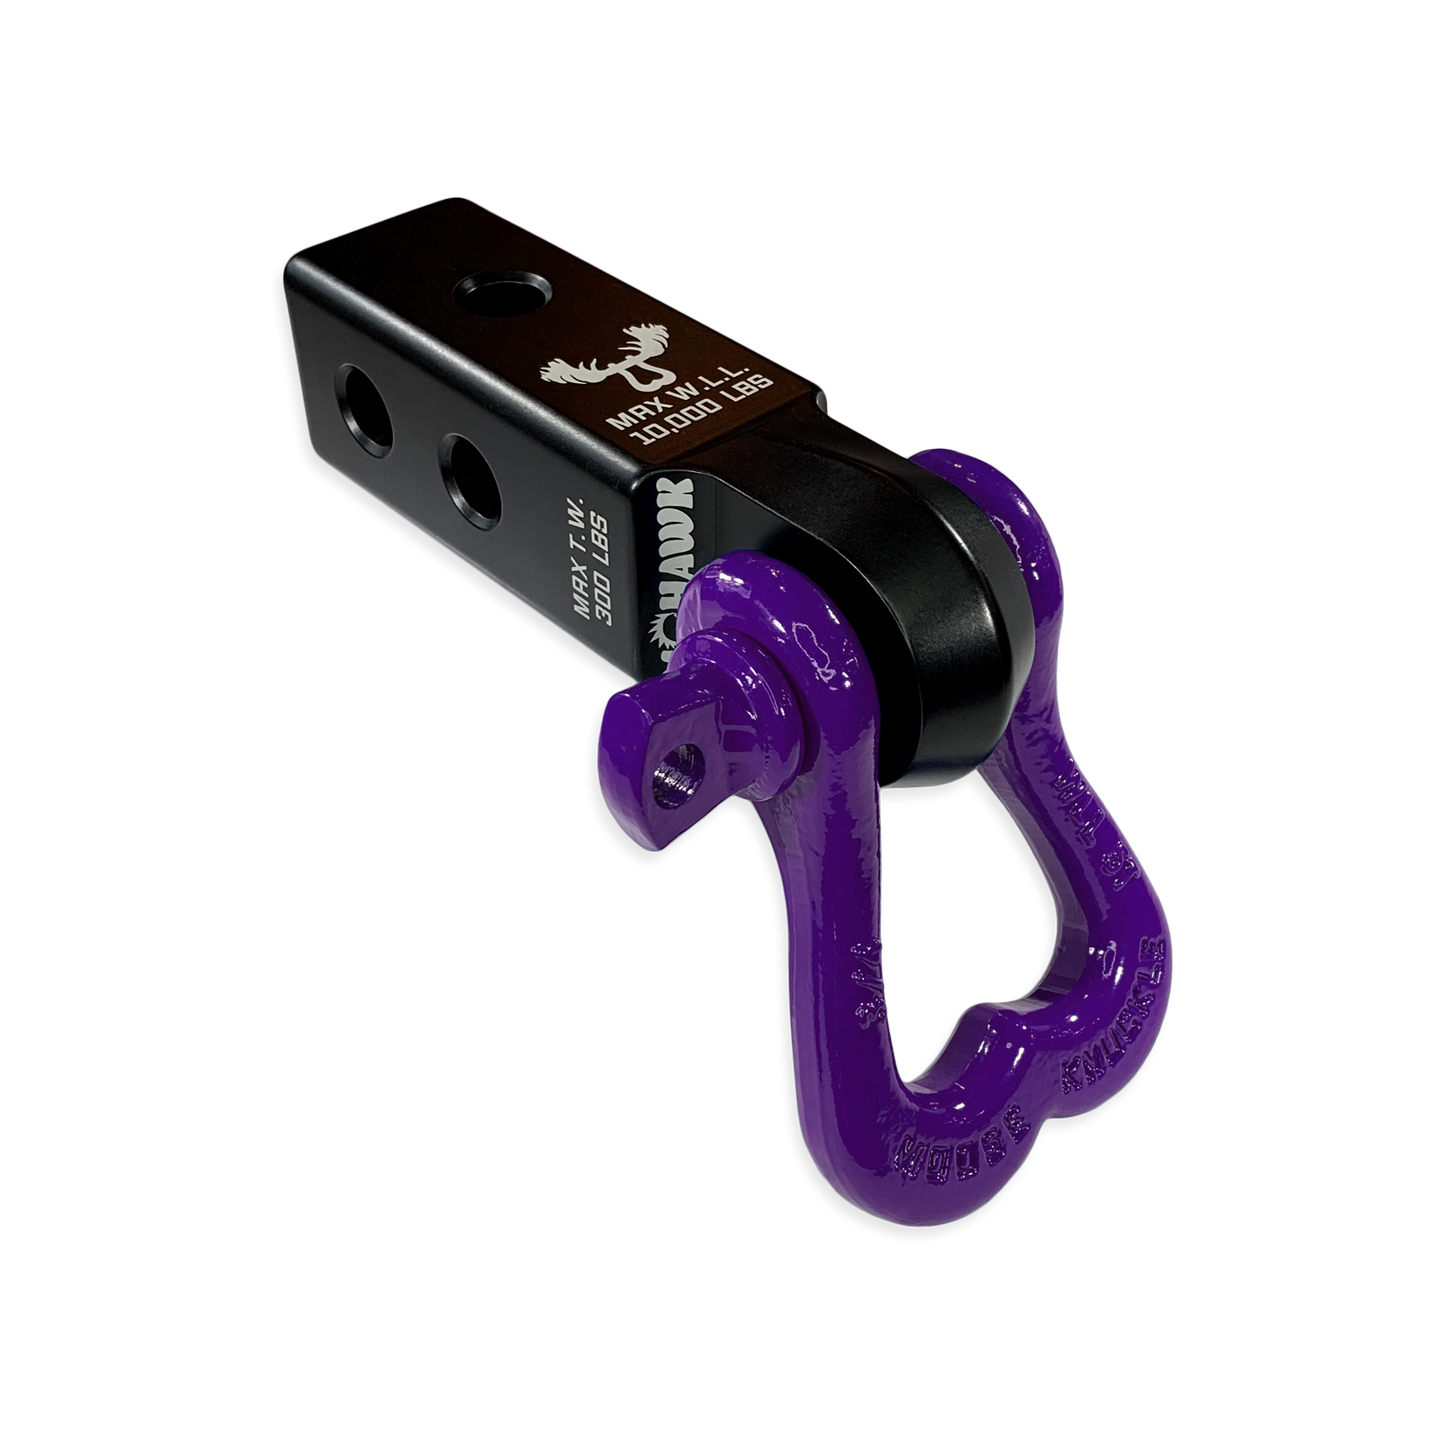 Moose Knuckle Offroad XL Grape Escape Purple D-Ring Shackle and Black Lung Mohawk 2.0 Shackle Receiver Combo for off-roading vehicle recovery and towing.